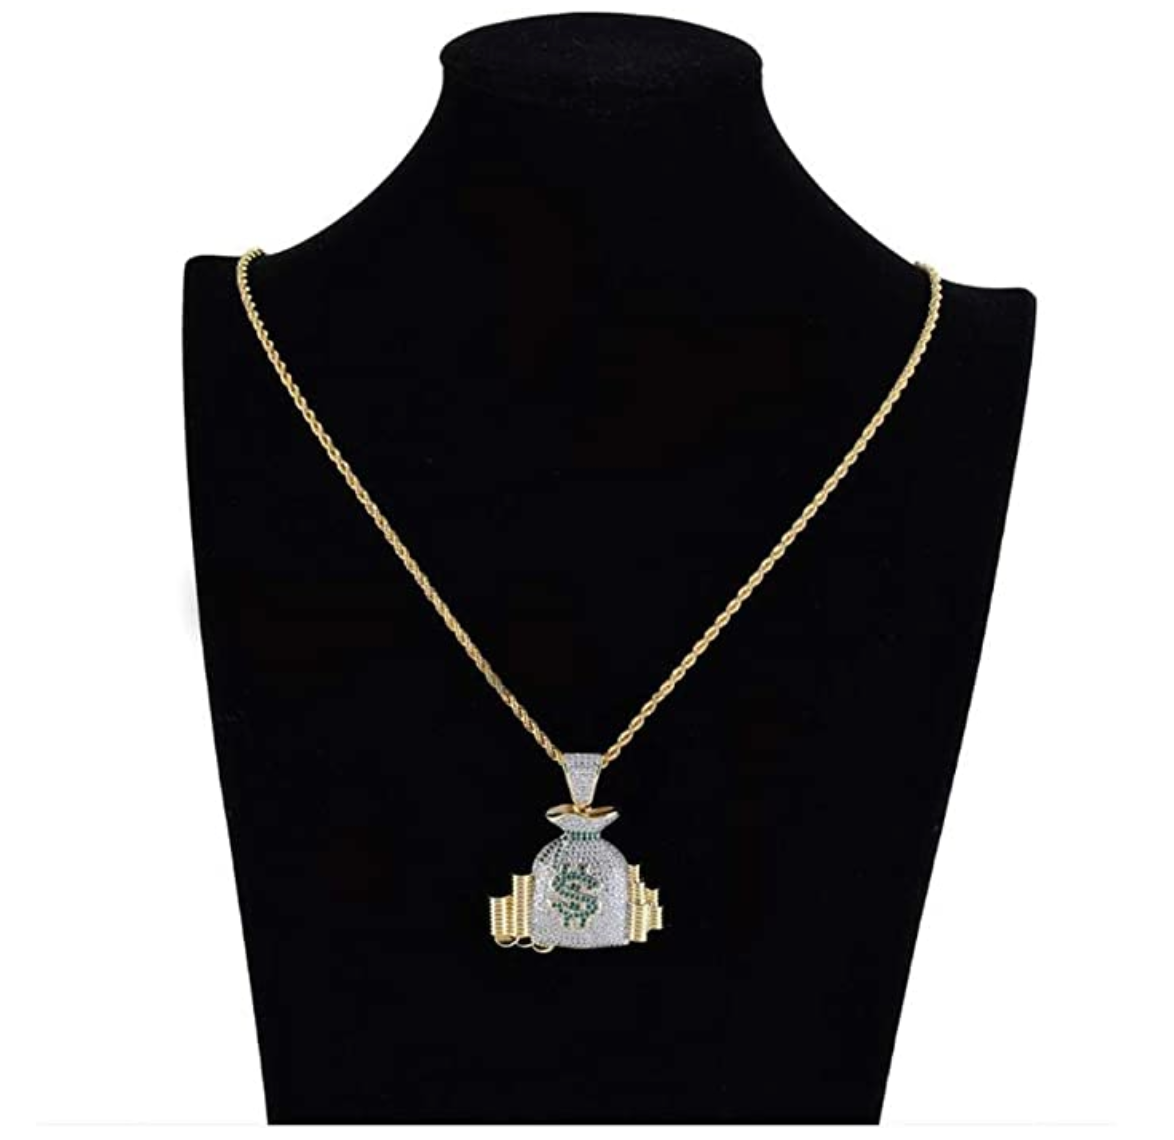 Money Bag Pendant Rapper Money Cash Necklace Cartoon Simulated Diamond Money Bag Chain Iced Out 24in.